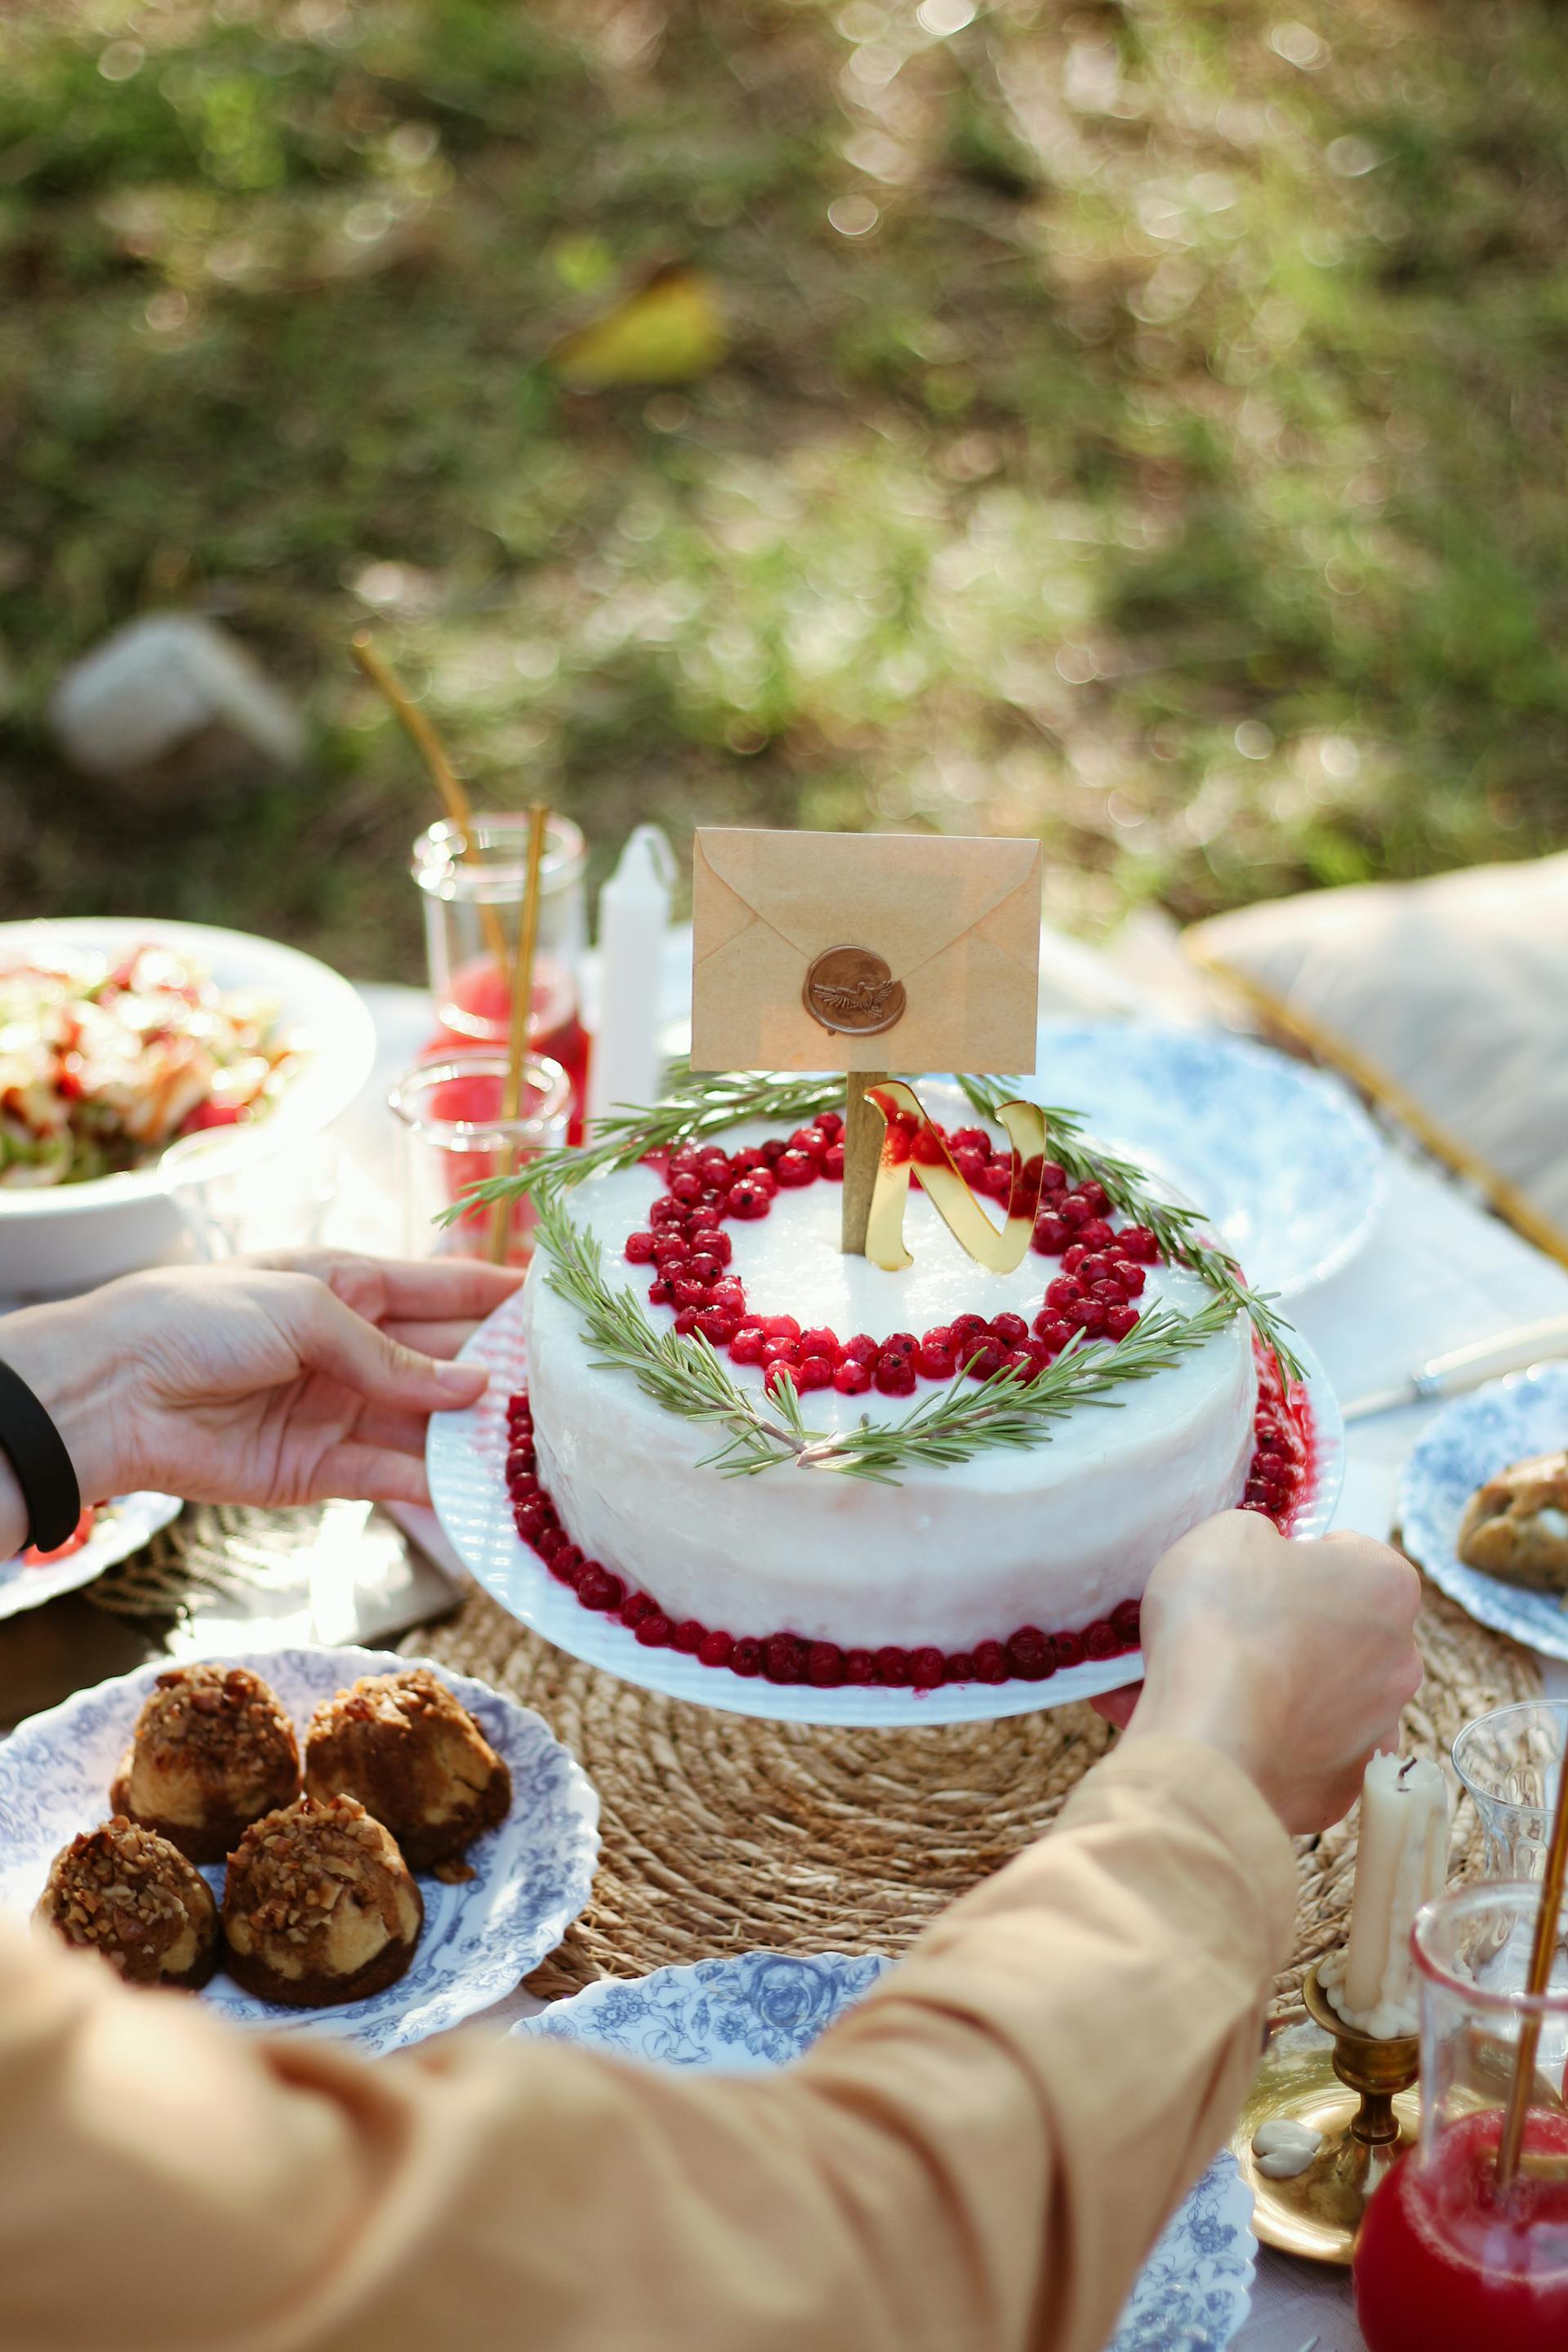 A person holding a cake over a dinner table | Source: Pexels